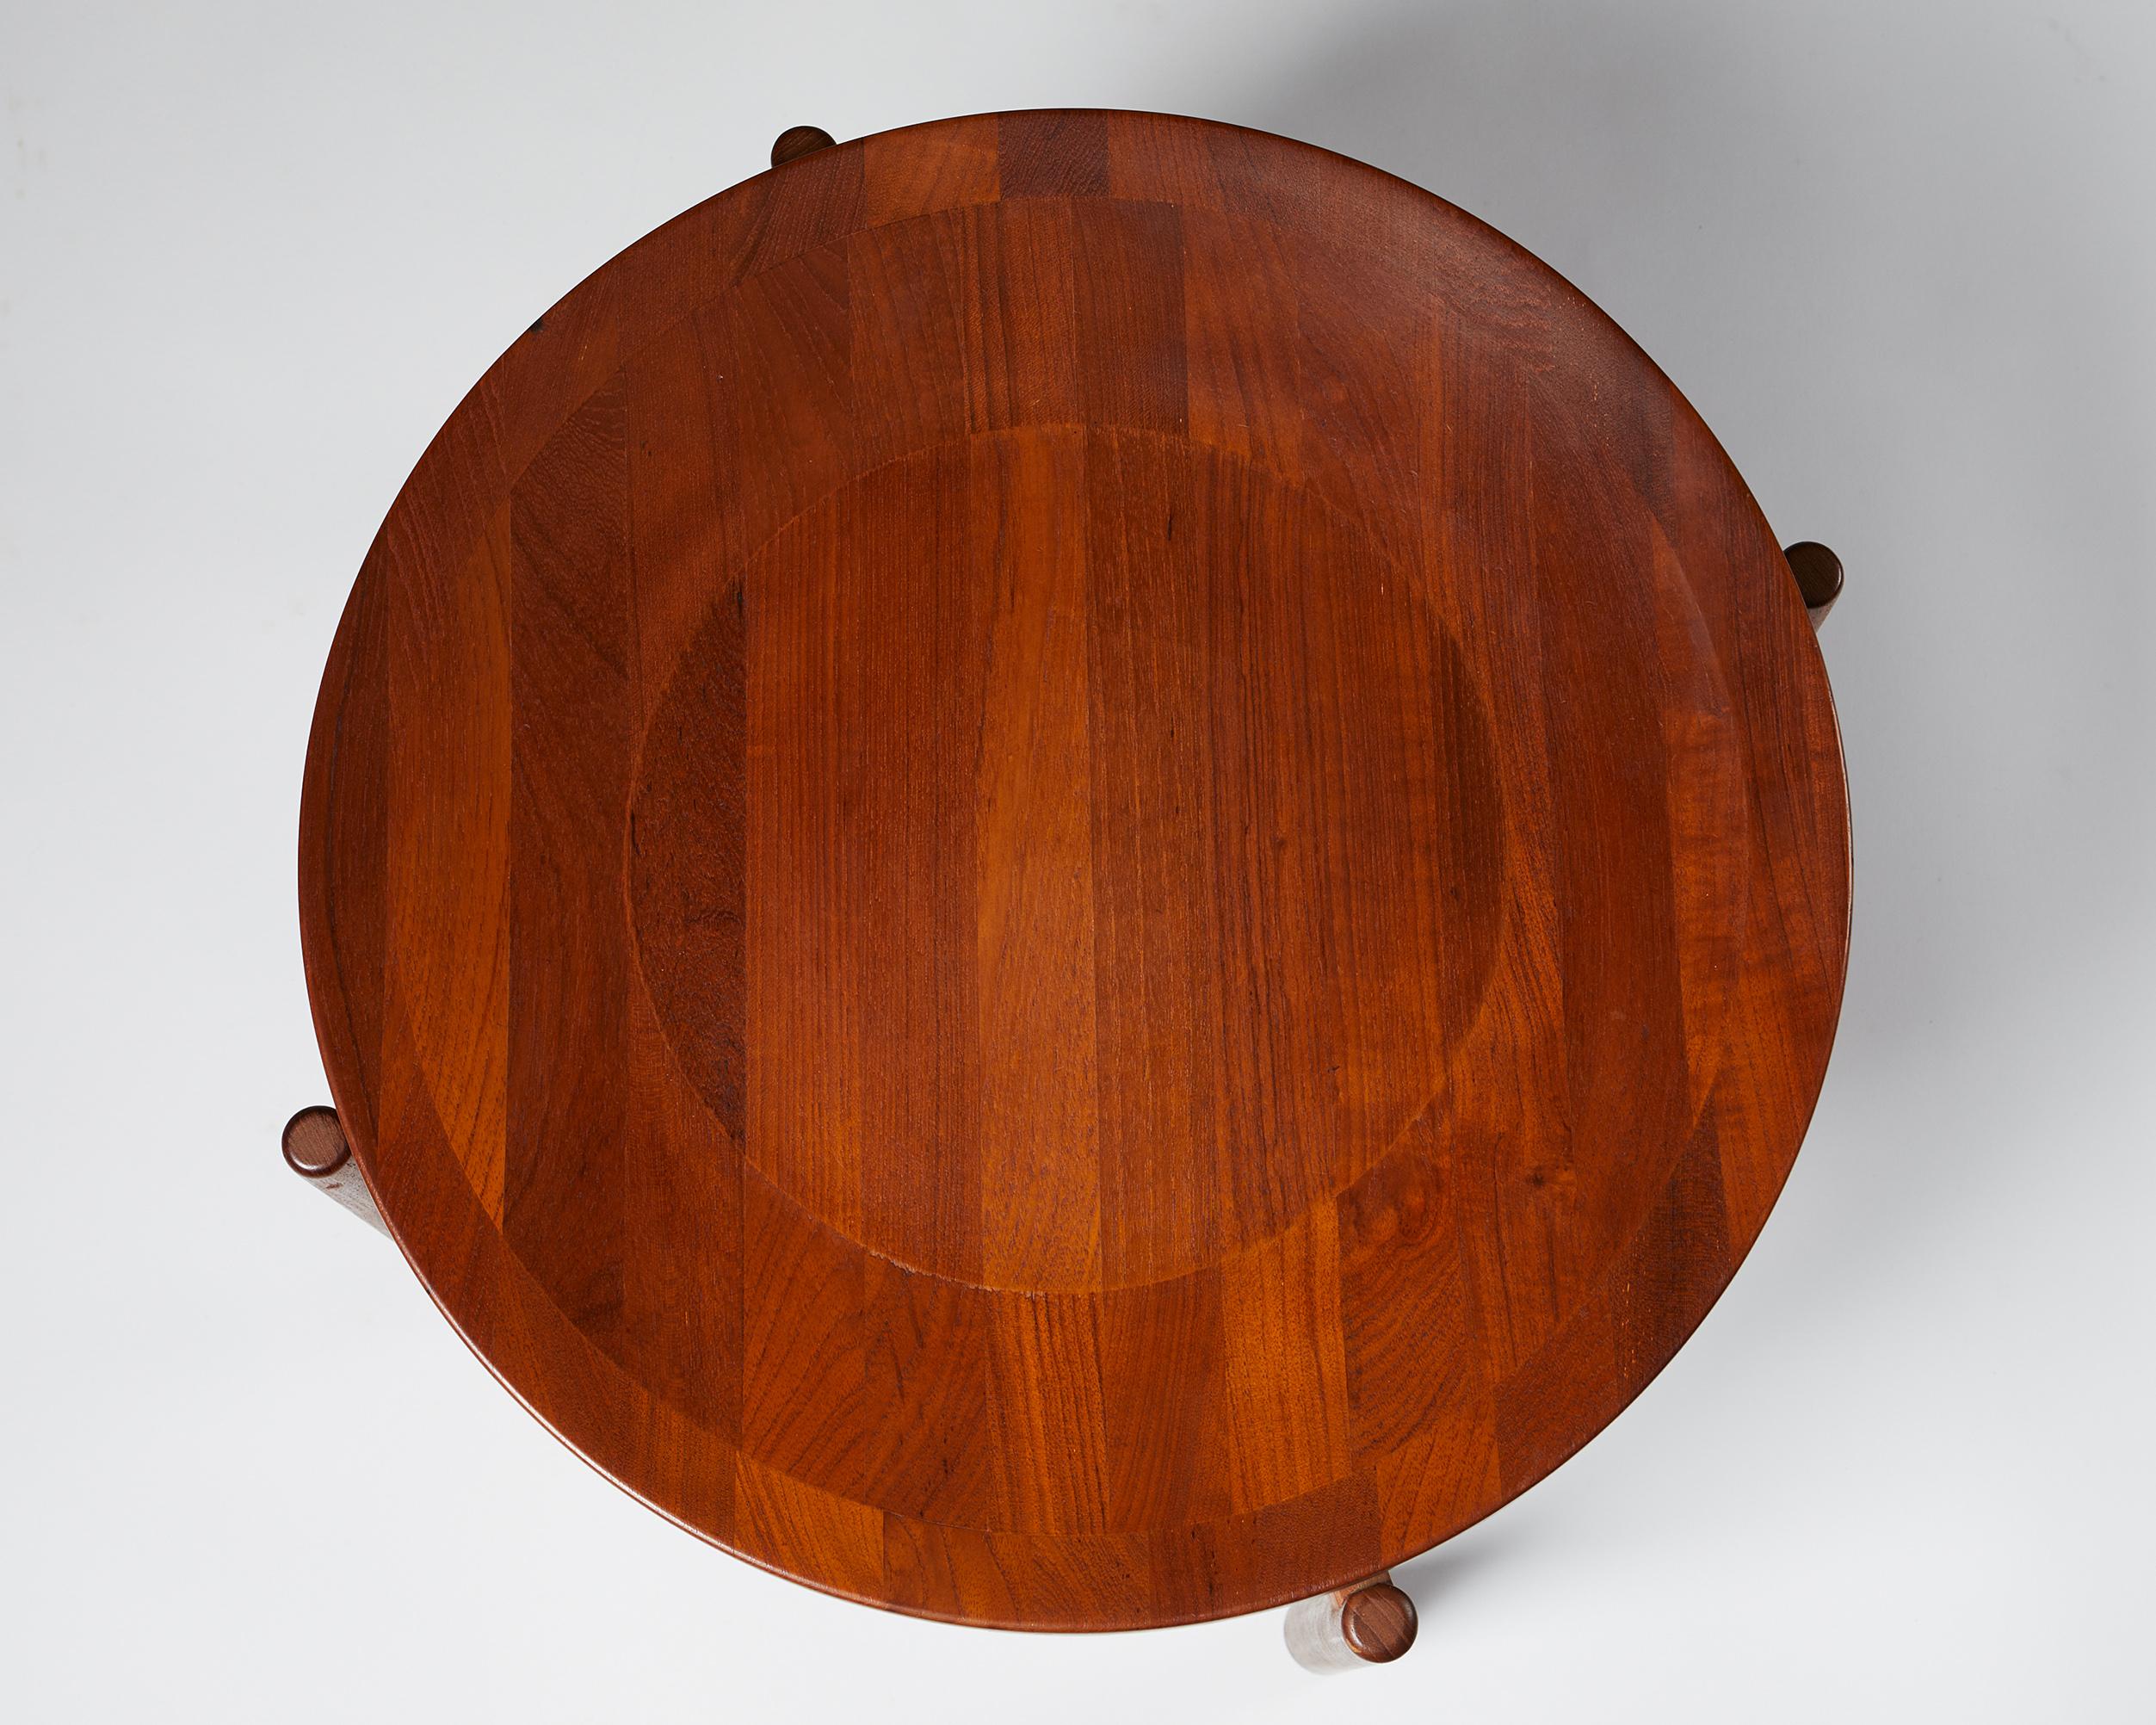 Teak Tray tables designed by Jens Quistgaard